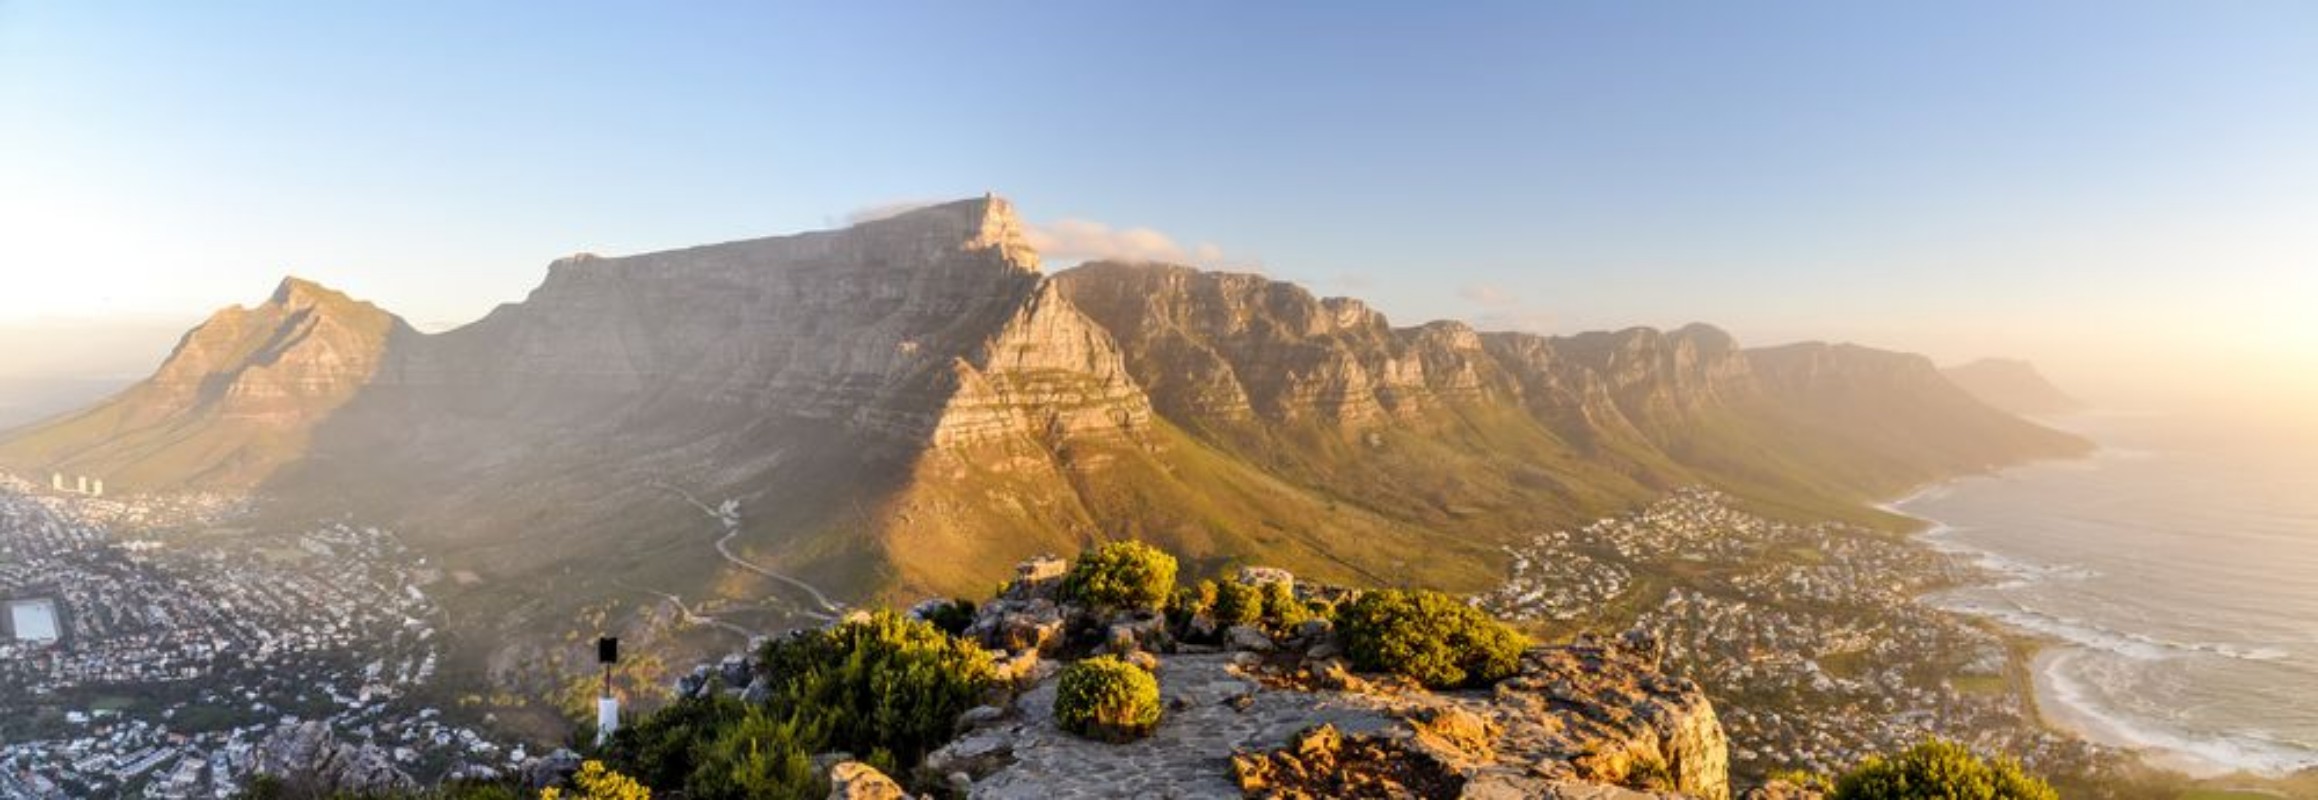 Image de XXL panorama of Table Mountain and the Twelve Apostles mountain range seen from Lions Head near Signal Hil in the evening sun Camps Bay on the right city of Cape Town on the left South Africa